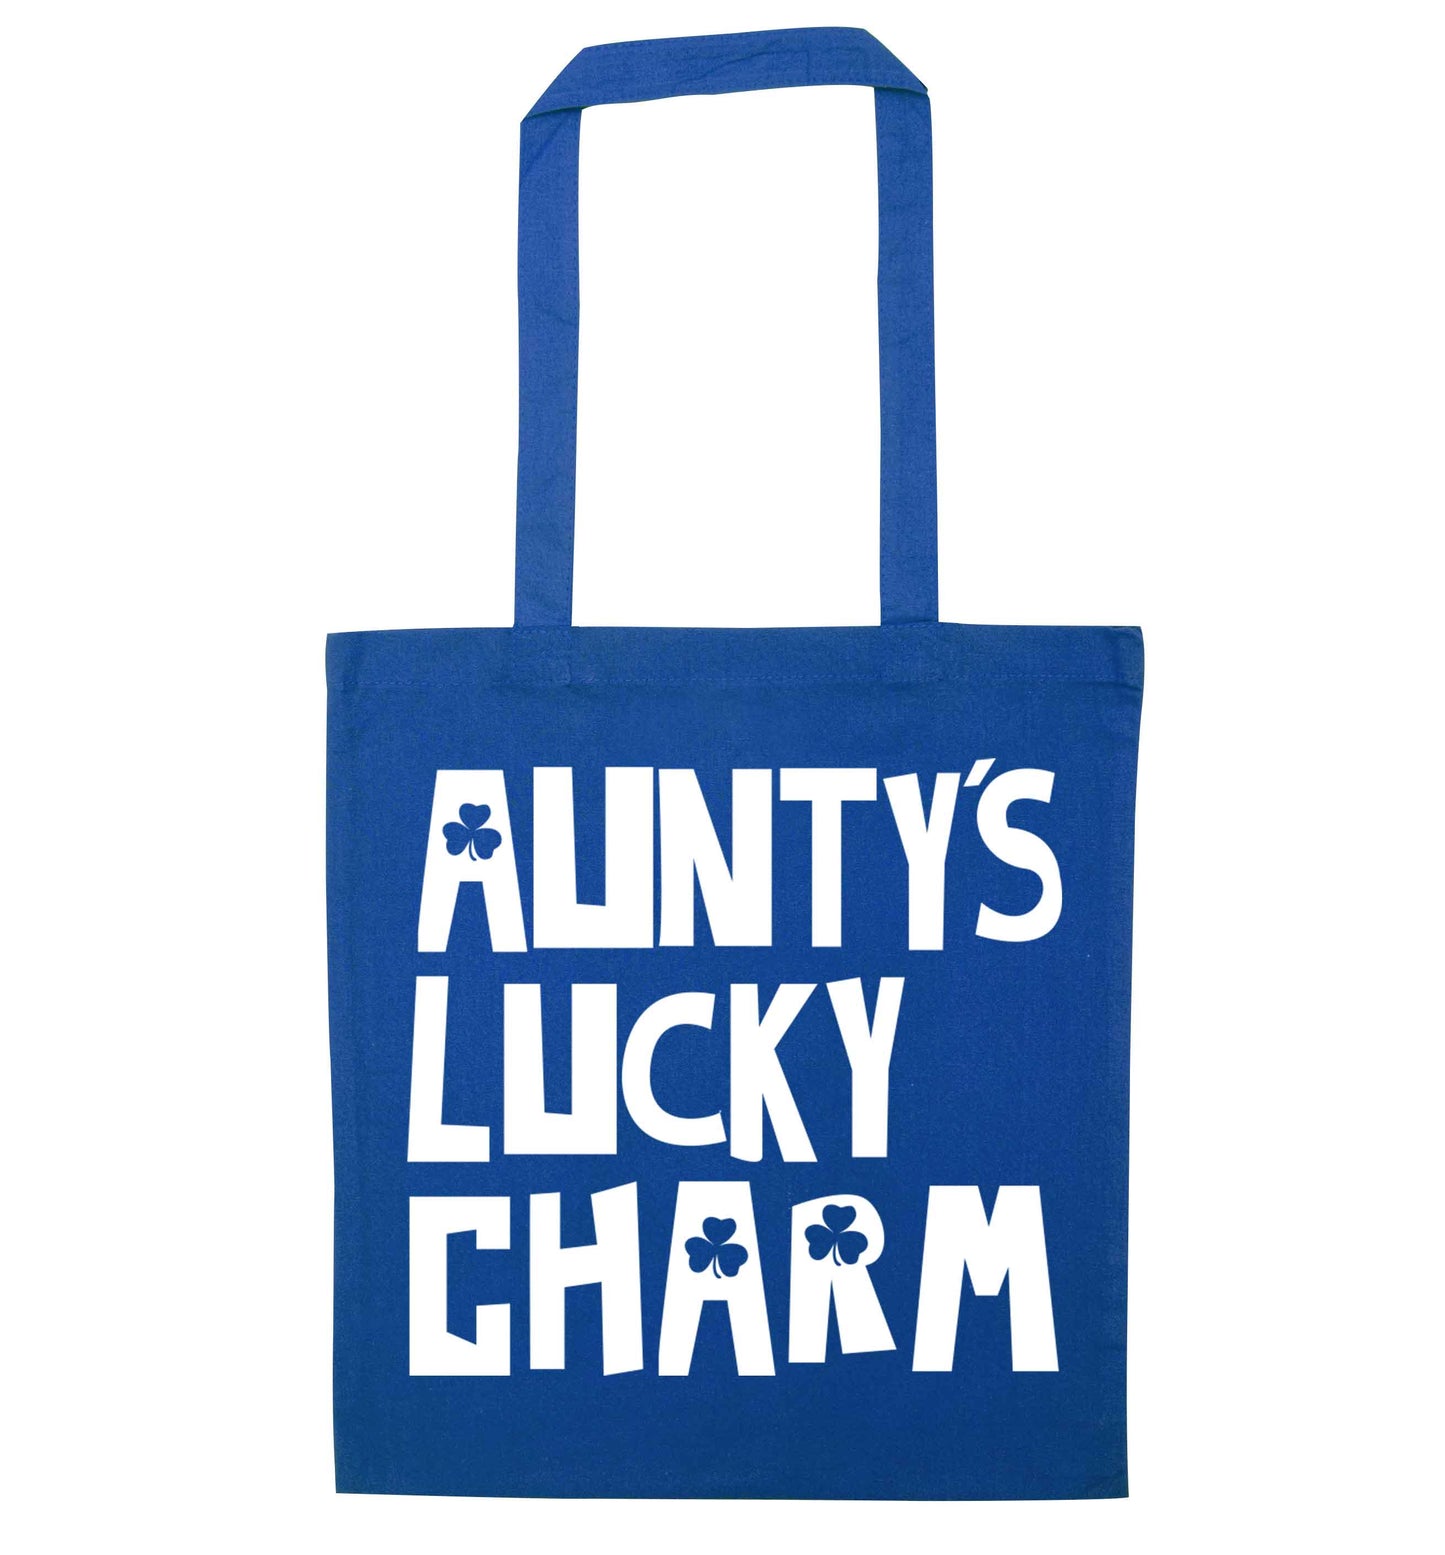 Aunty's lucky charm blue tote bag